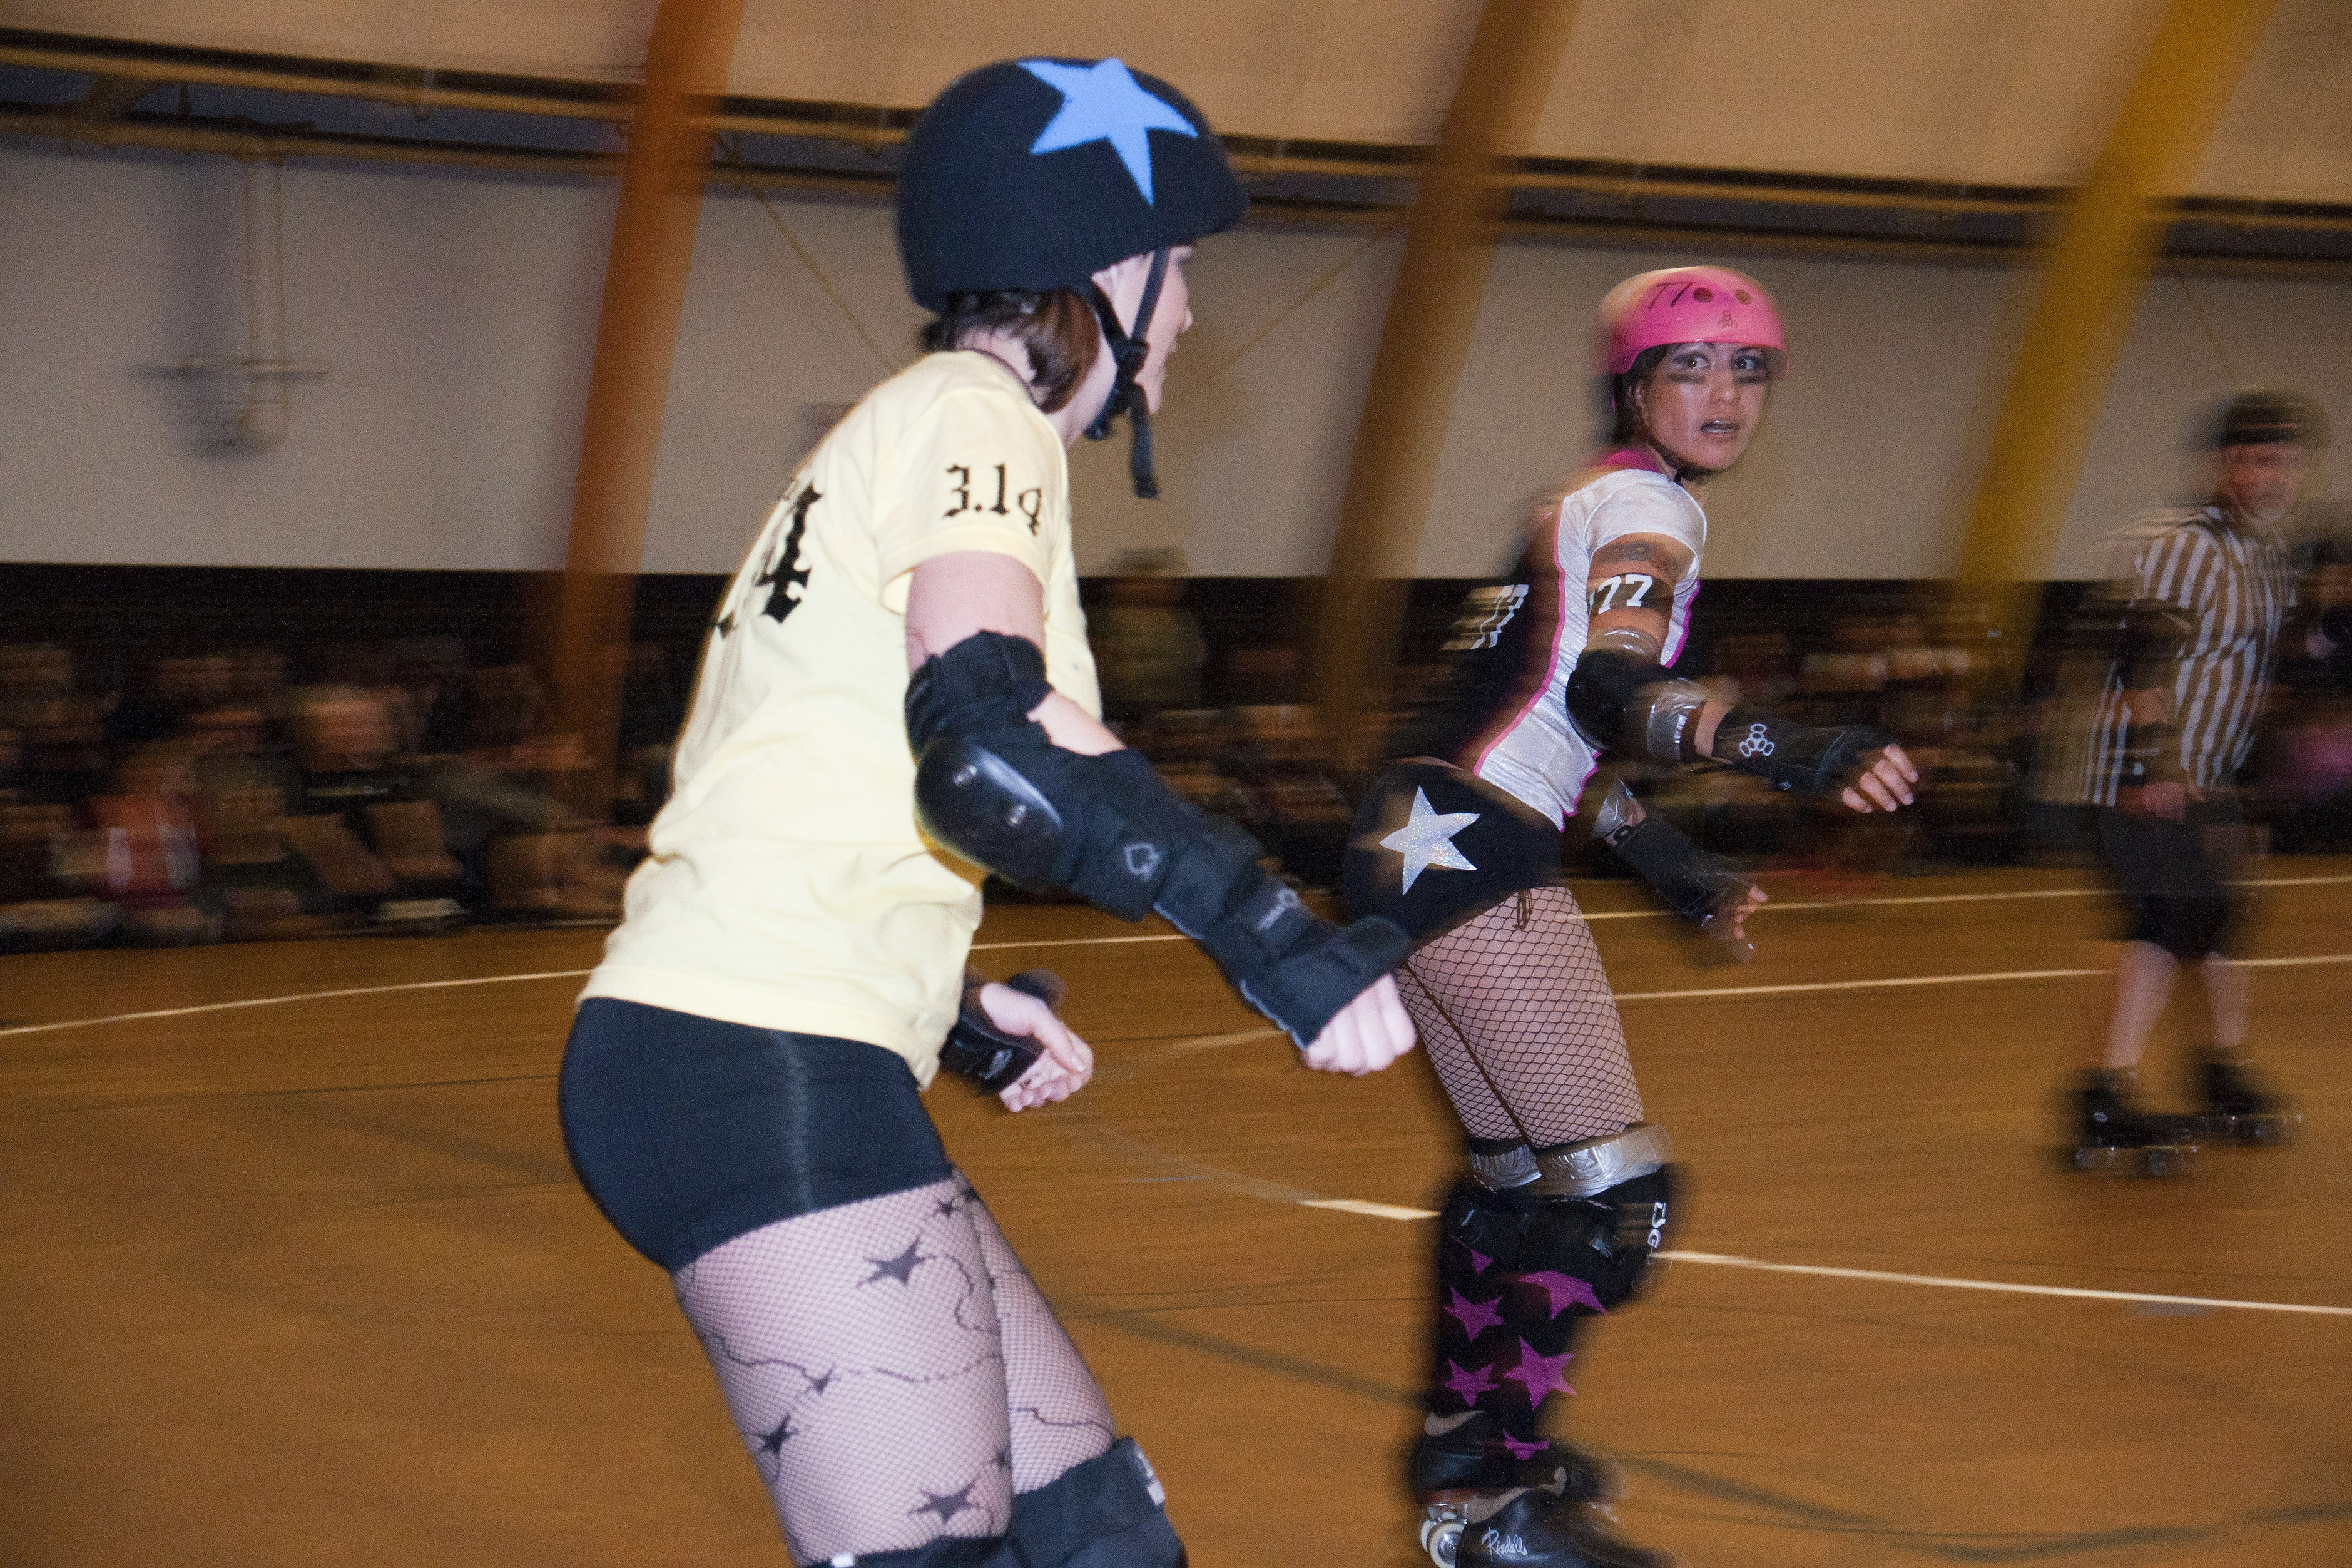 RollerDerby-Expressions03